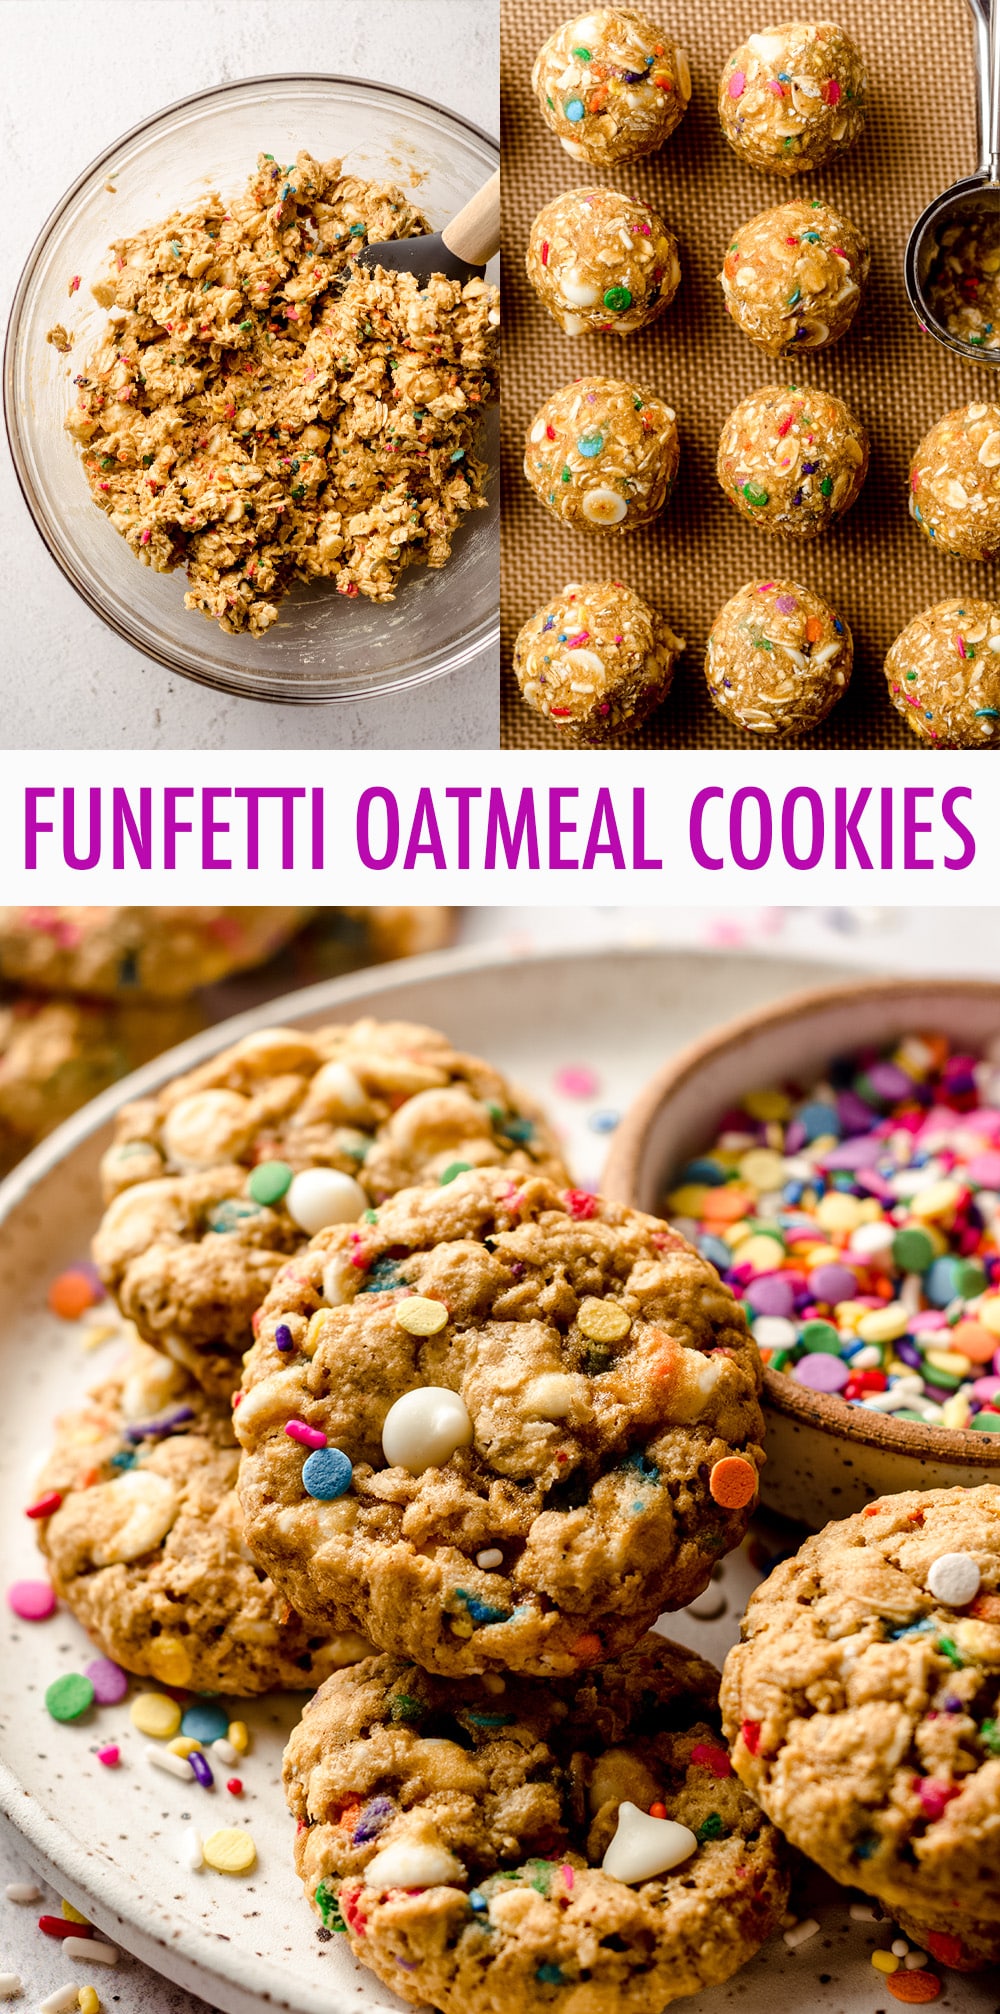 Soft and chewy oatmeal cookies filled with white chocolate chips and plenty of sprinkles for celebrating any occasion! via @frshaprilflours